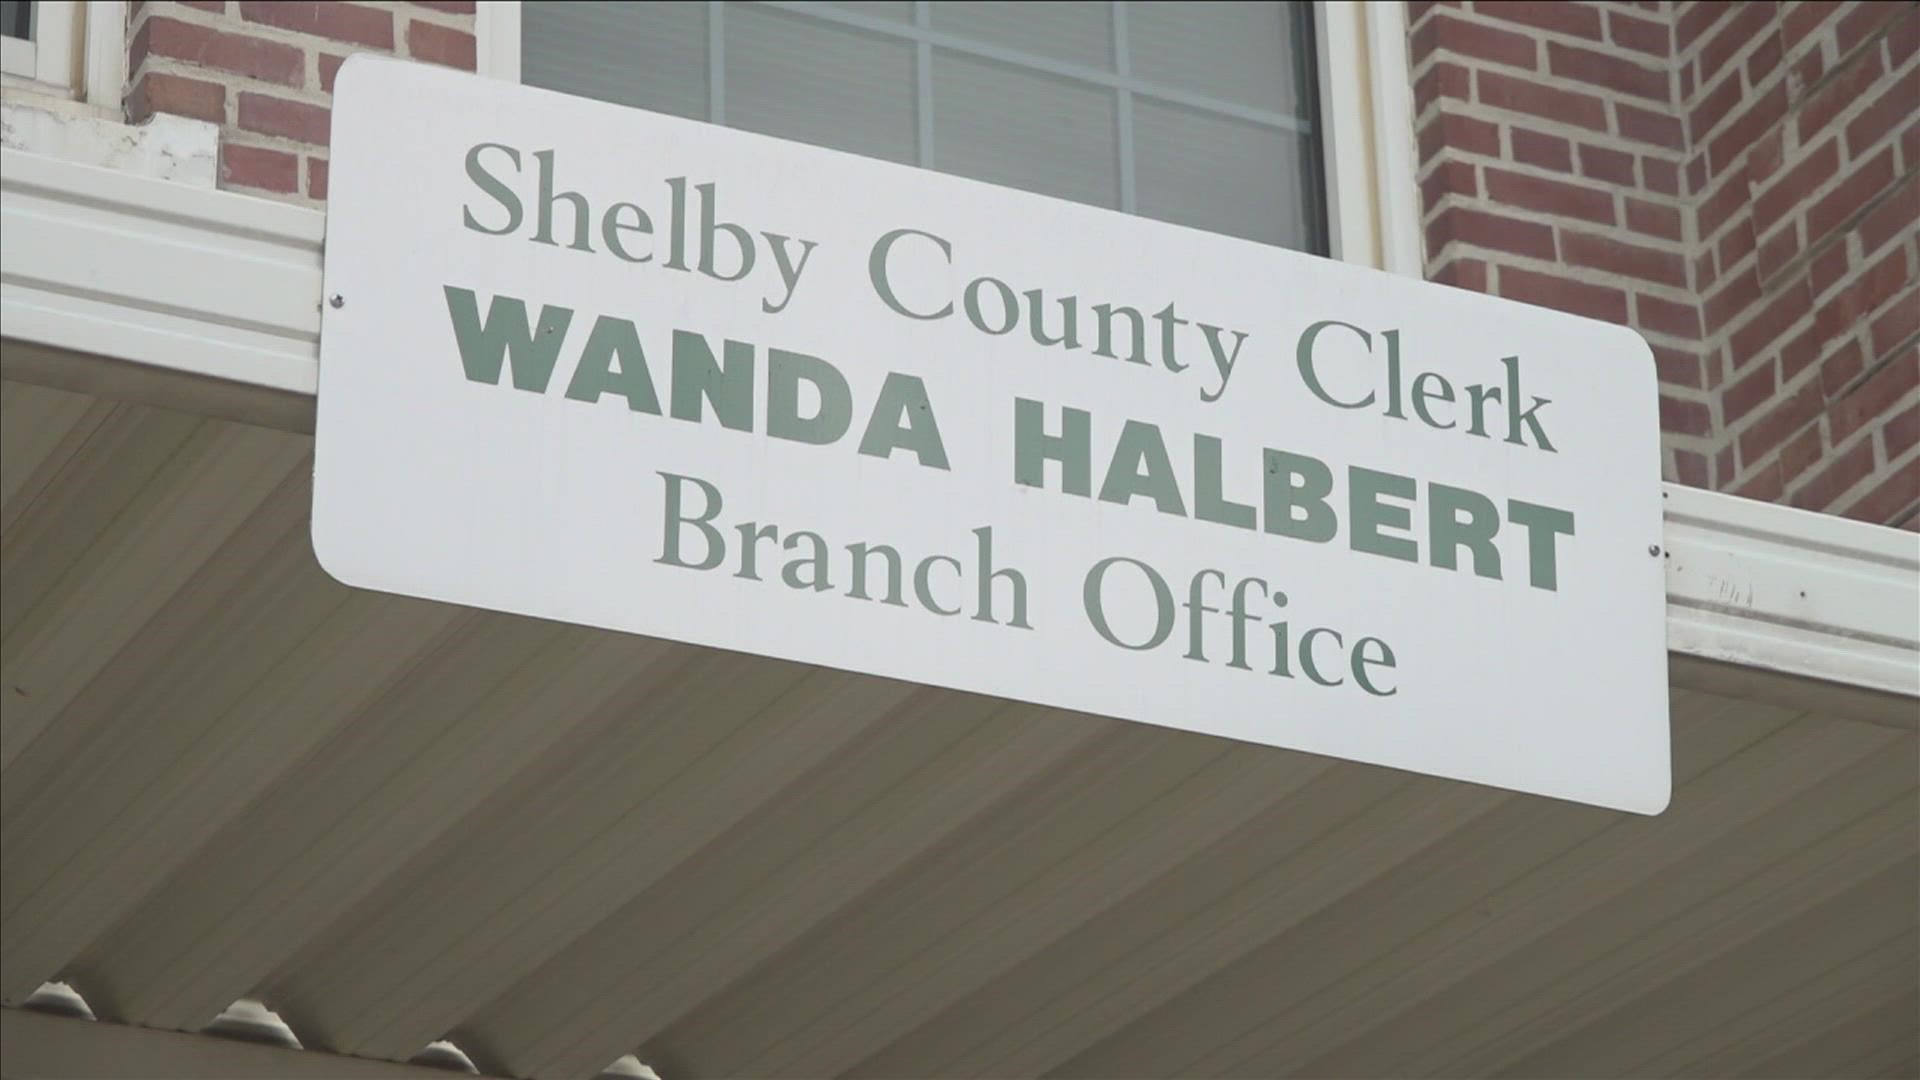 Shelby County Clerk Wanda Halbert said she doesn't want the money given to her office in a recent city council meeting for distributing the new plates.